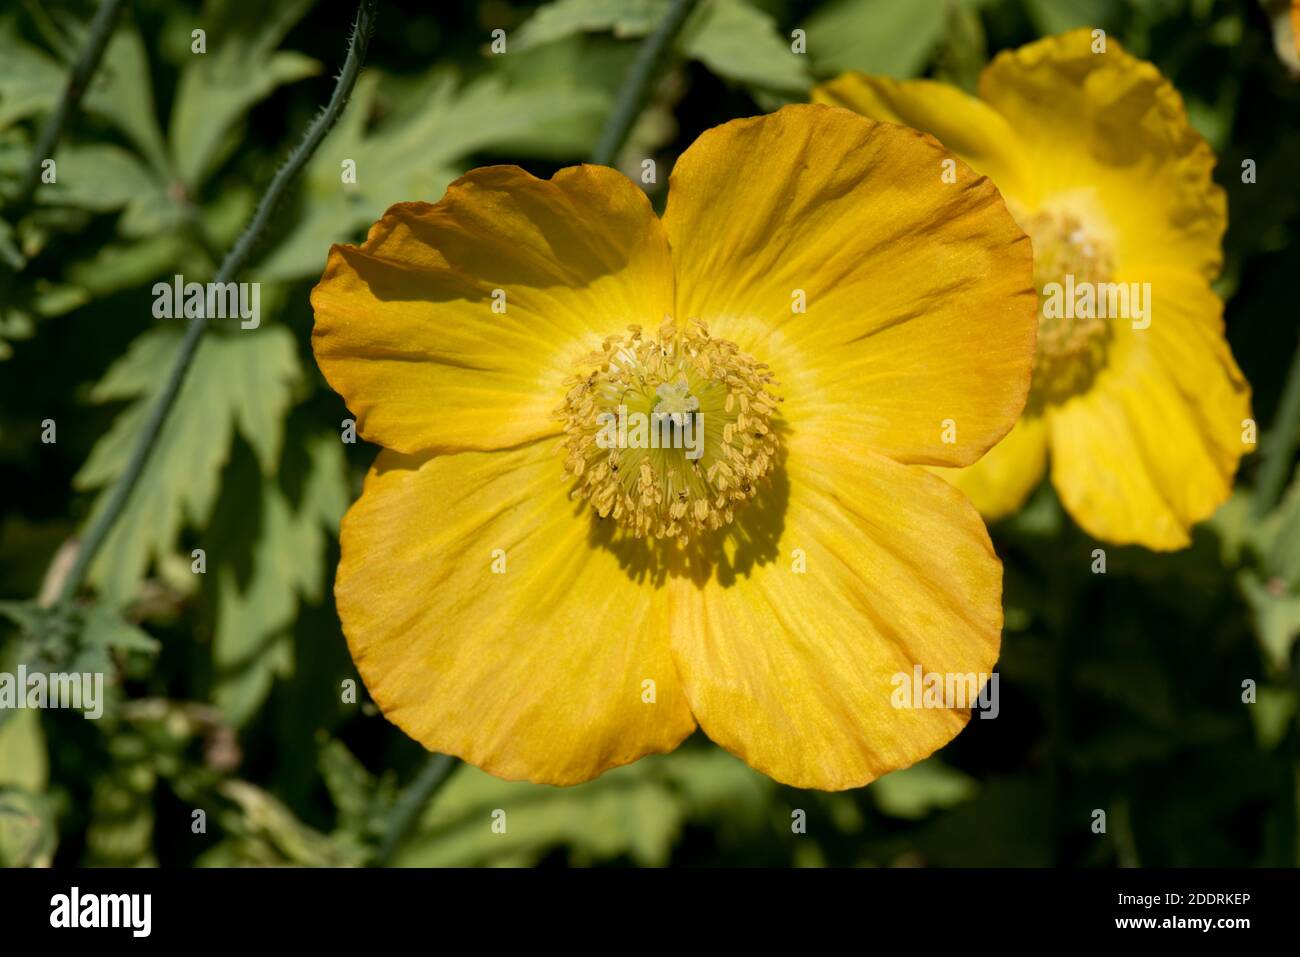 yellow orange flowers of Welsh poppy (Meconopsis cambrica) and plant leaves in a country garden, Berkshire, May Stock Photo